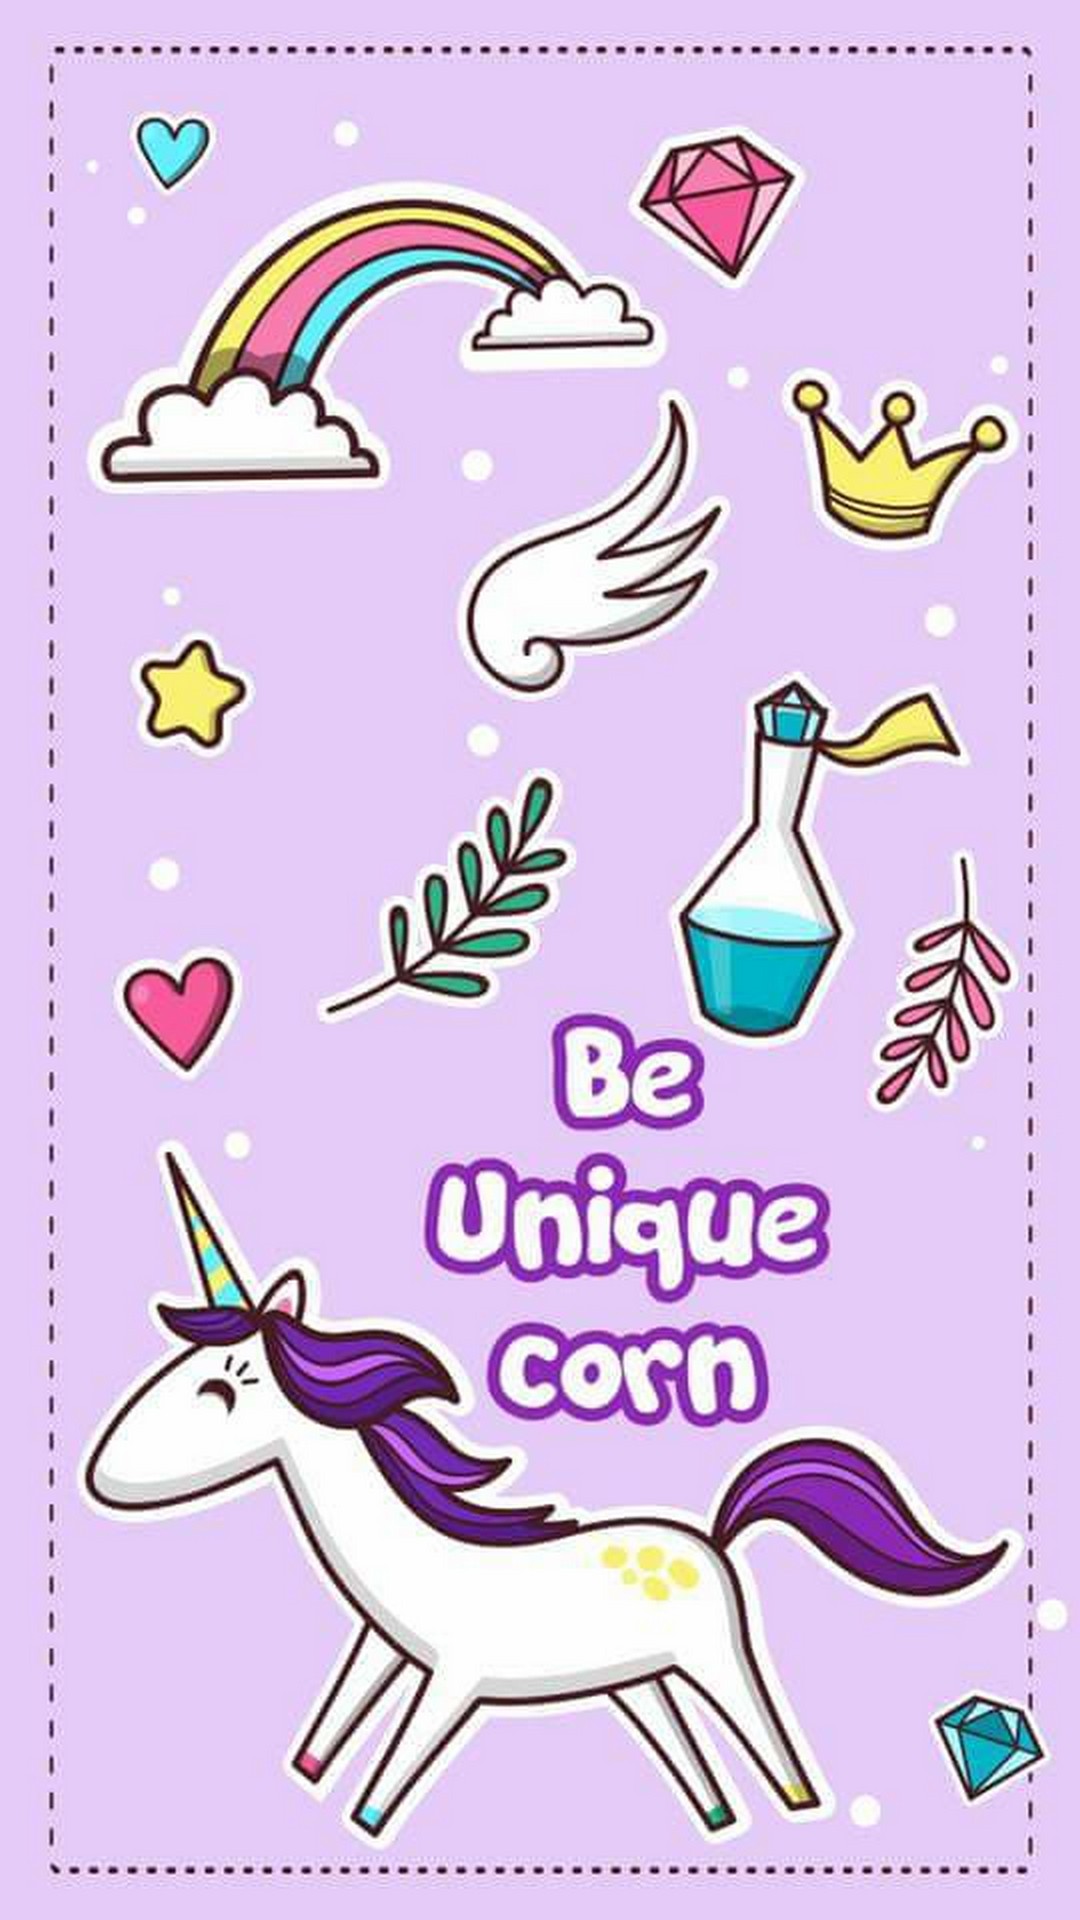 Unicorn iPhone Wallpaper Design with high-resolution 1080x1920 pixel. You can set as wallpaper for Apple iPhone X, XS Max, XR, 8, 7, 6, SE, iPad. Enjoy and share your favorite HD wallpapers and background images